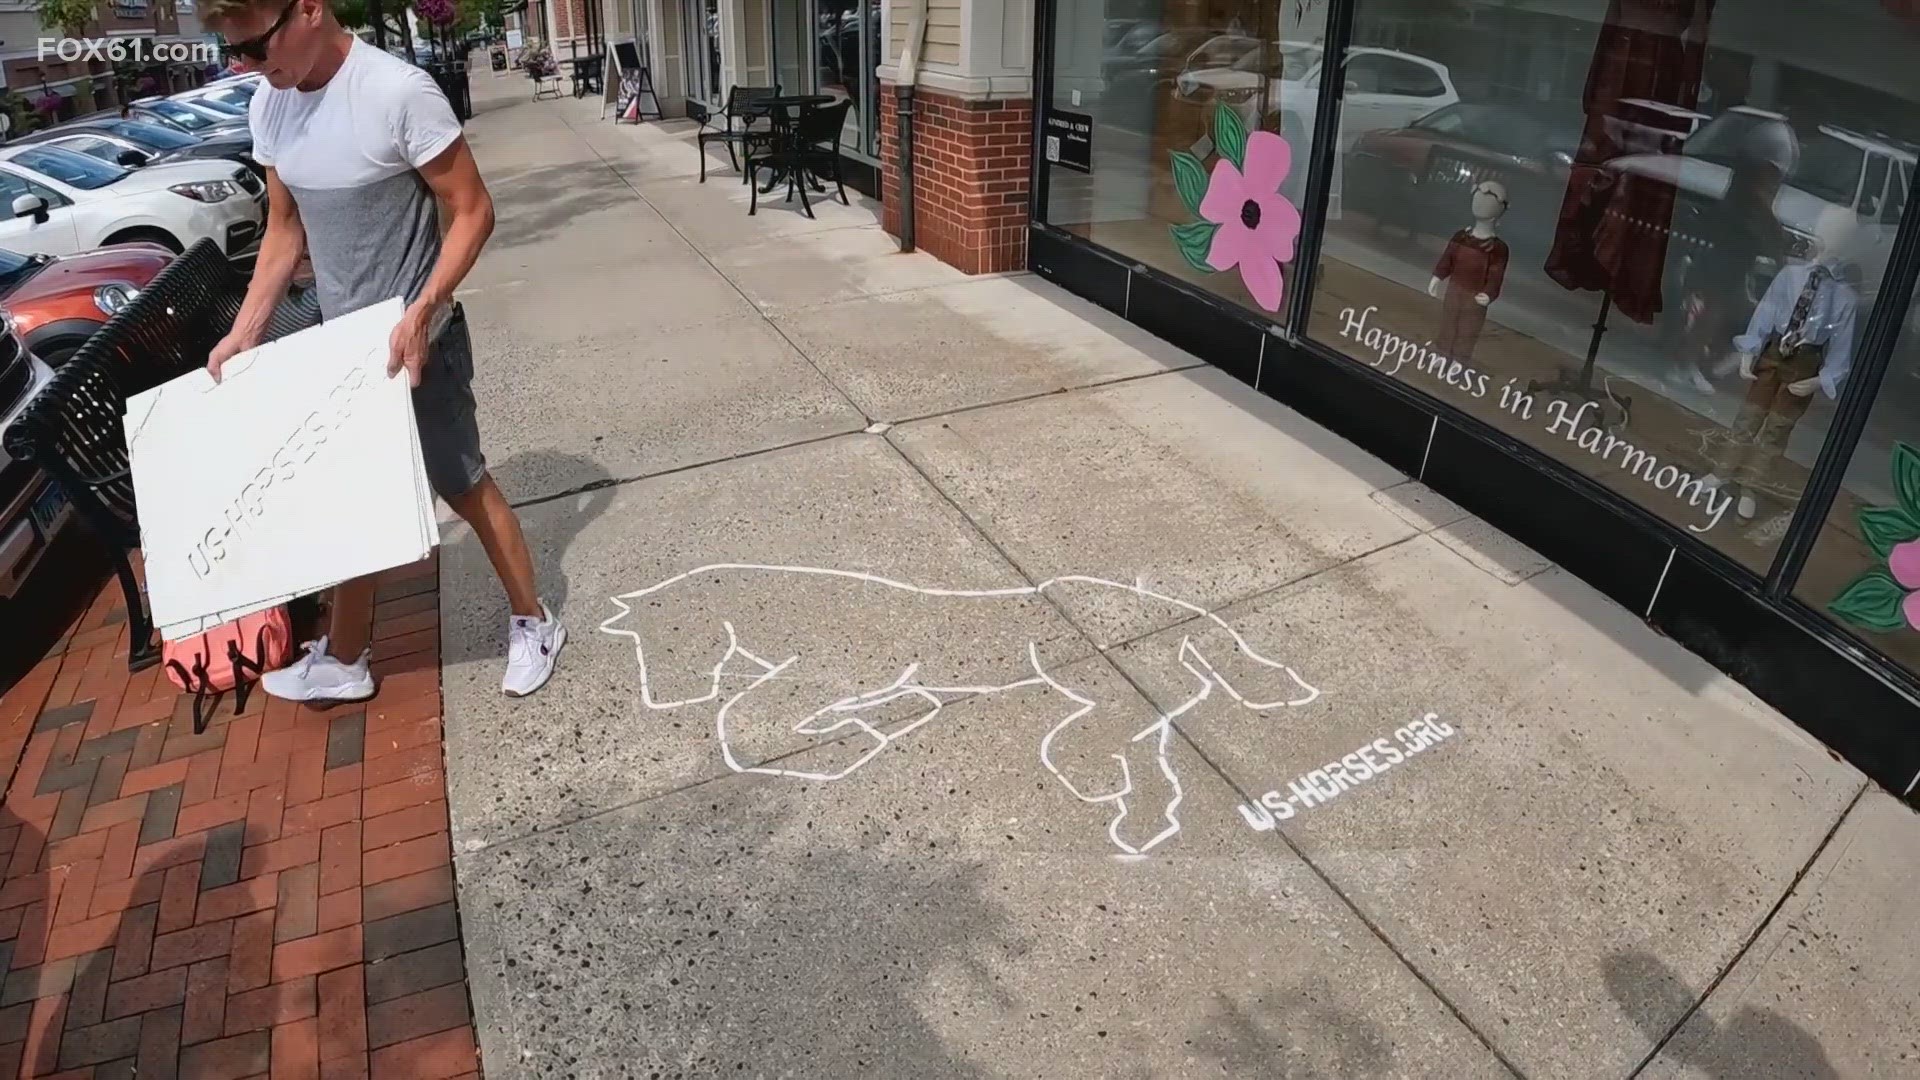 The chalk outlines of wild horses are popping up across parts of the Farmington Valley, most recently at the Shops at Farmington Valley.